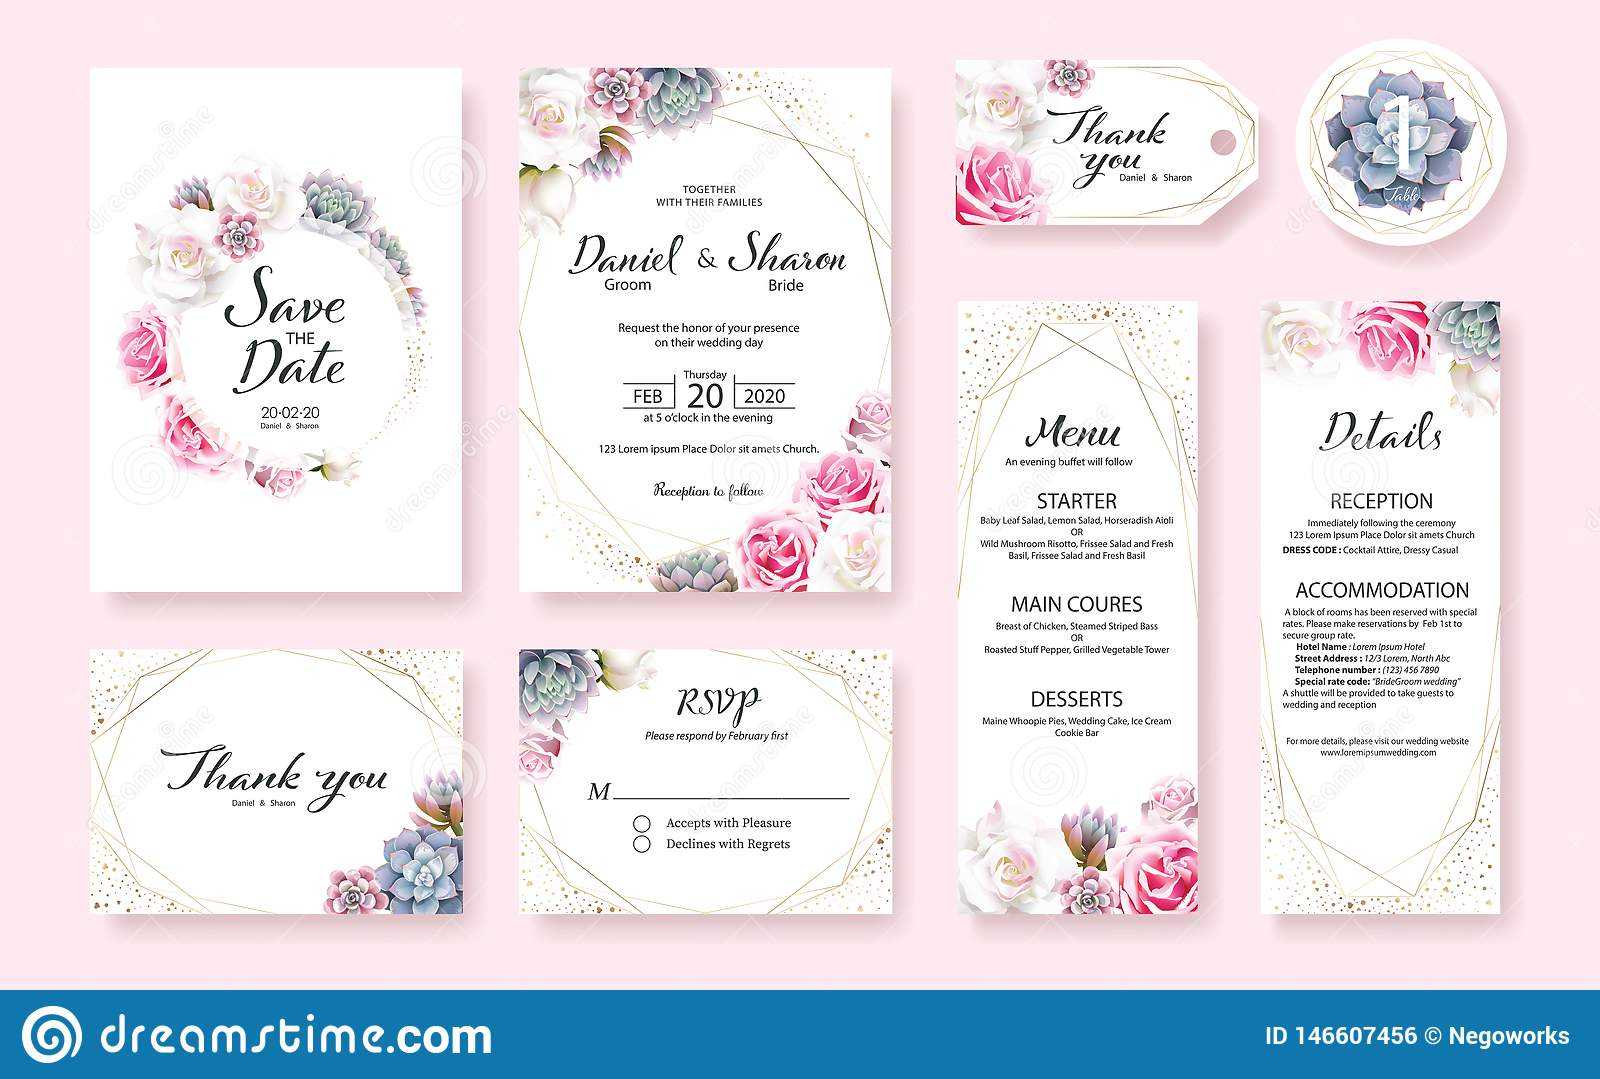 Floral Wedding Invitation Card, Save The Date, Thank You With Table Reservation Card Template